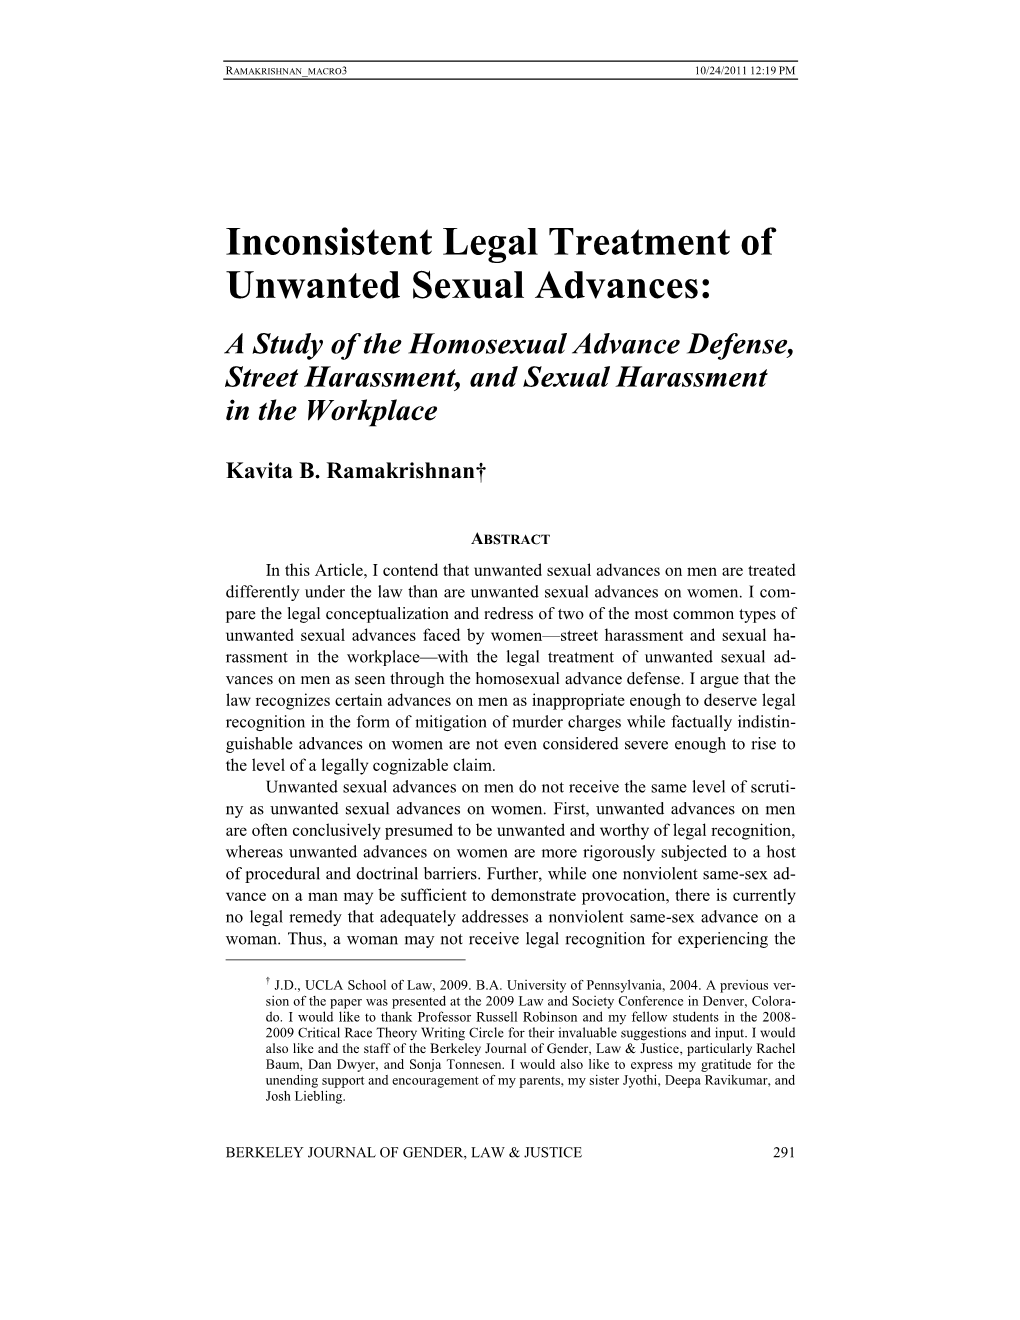 Inconsistent Legal Treatment of Unwanted Sexual Advances: a Study of the Homosexual Advance Defense, Street Harassment, and Sexual Harassment in the Workplace